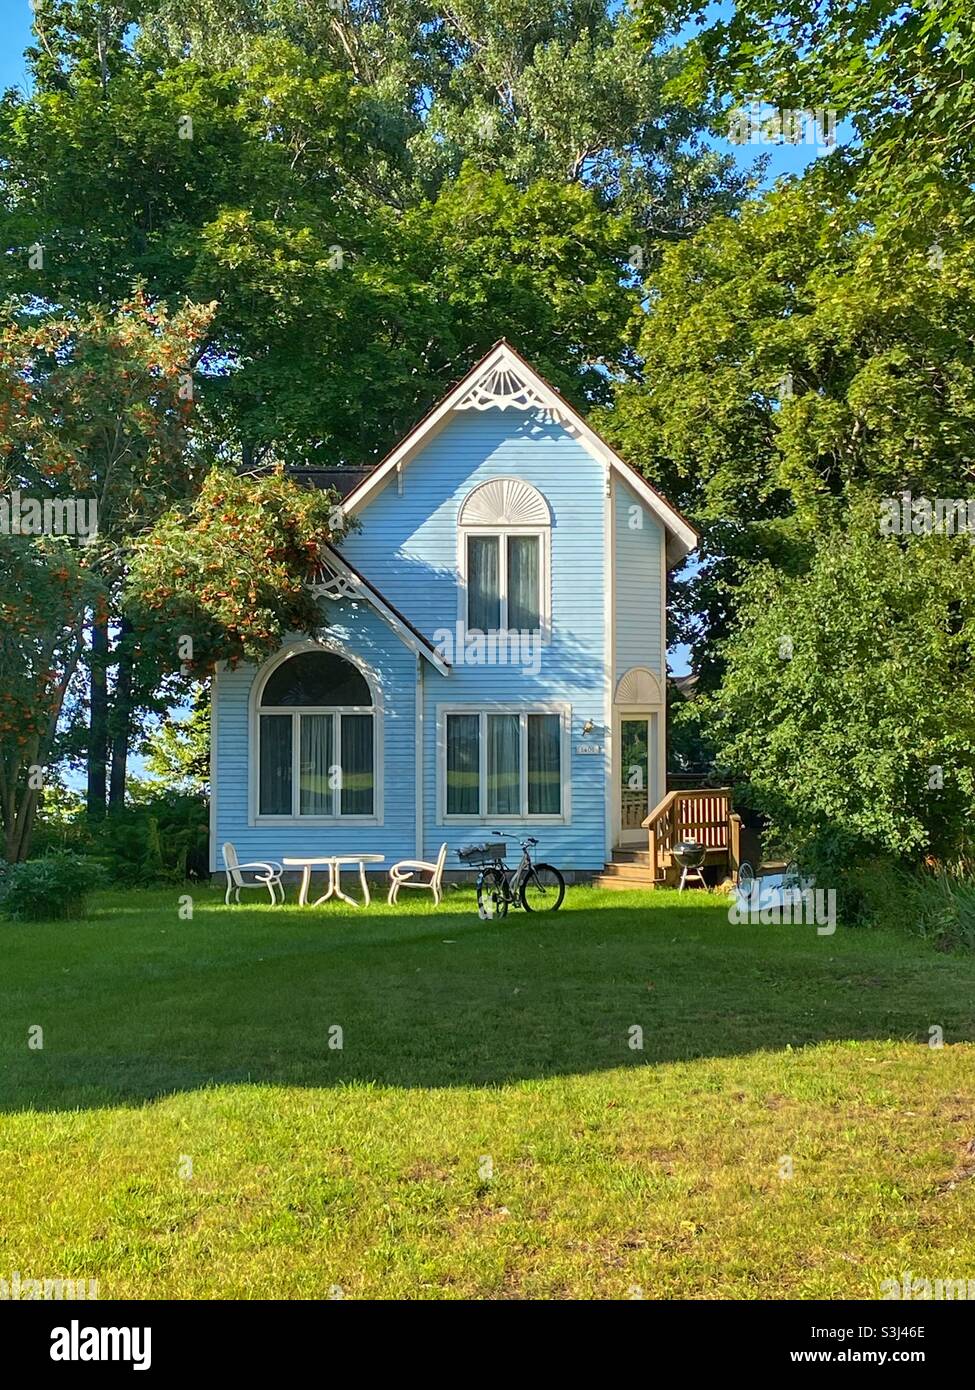 Cute house that looks like it should be a doll house Stock Photo